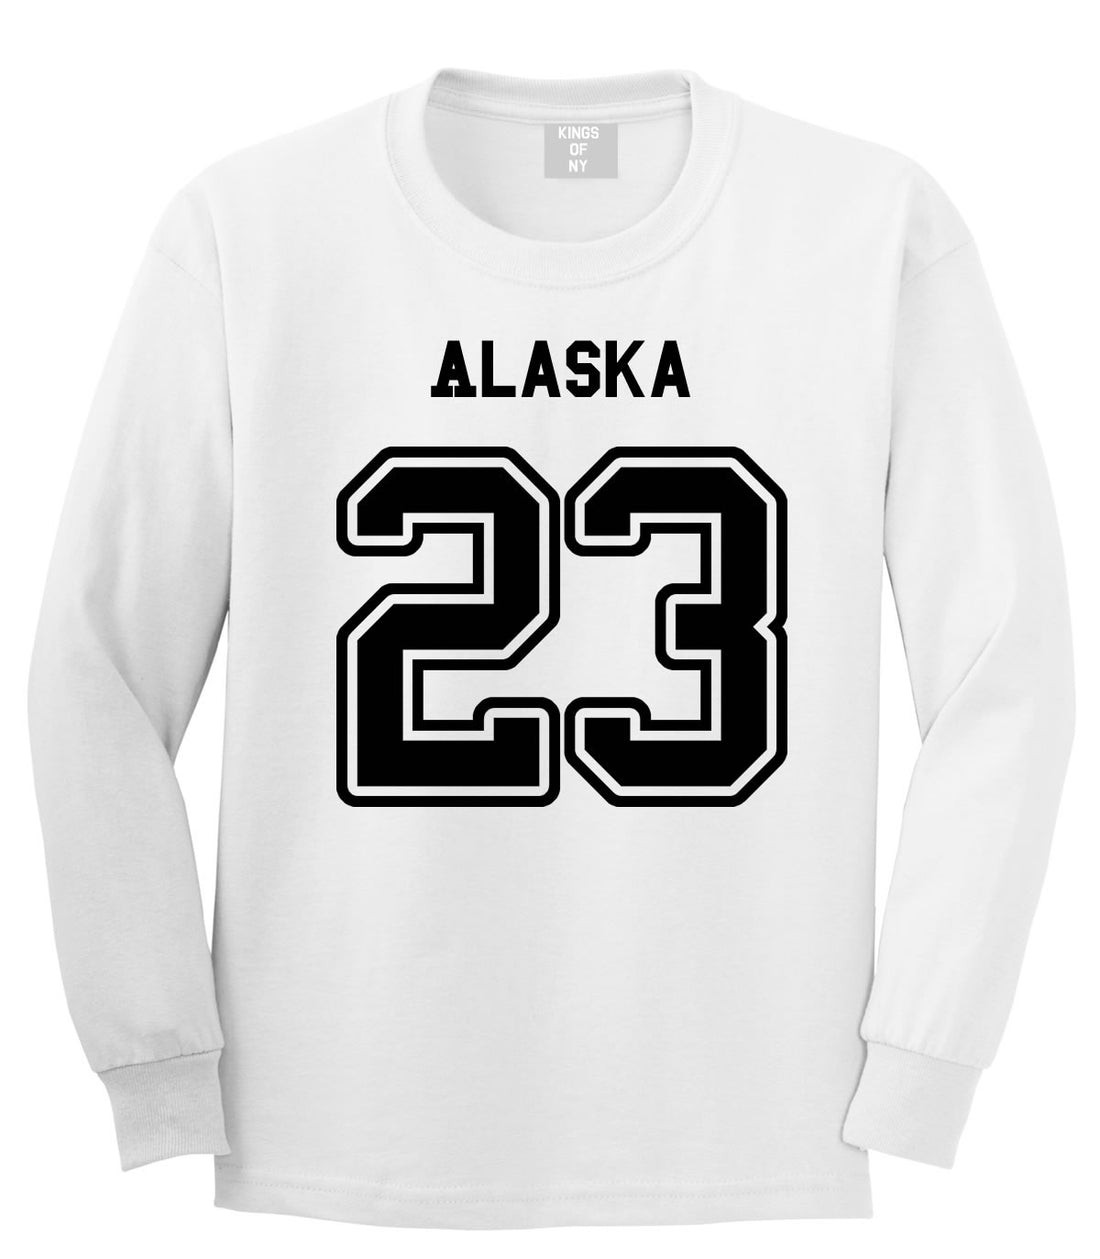 Sport Style Alaska 23 Team State Jersey Long Sleeve T-Shirt By Kings Of NY